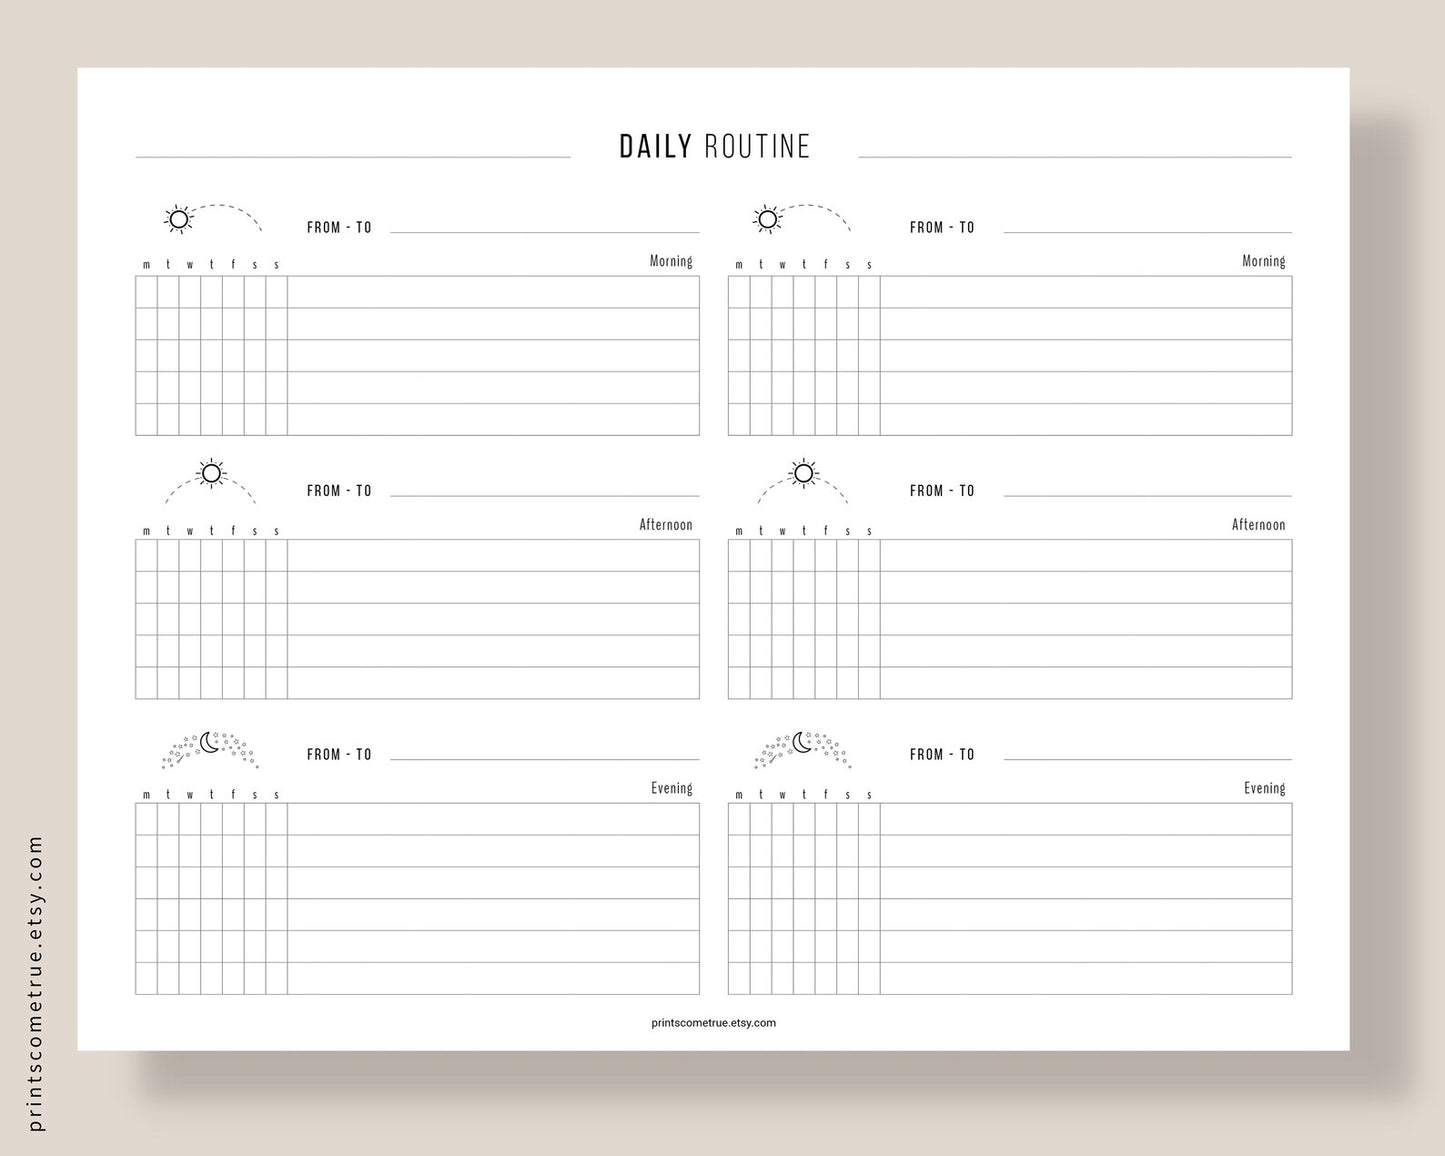 Daily Routine for Family - Printable Planner PDF - Letter - 6